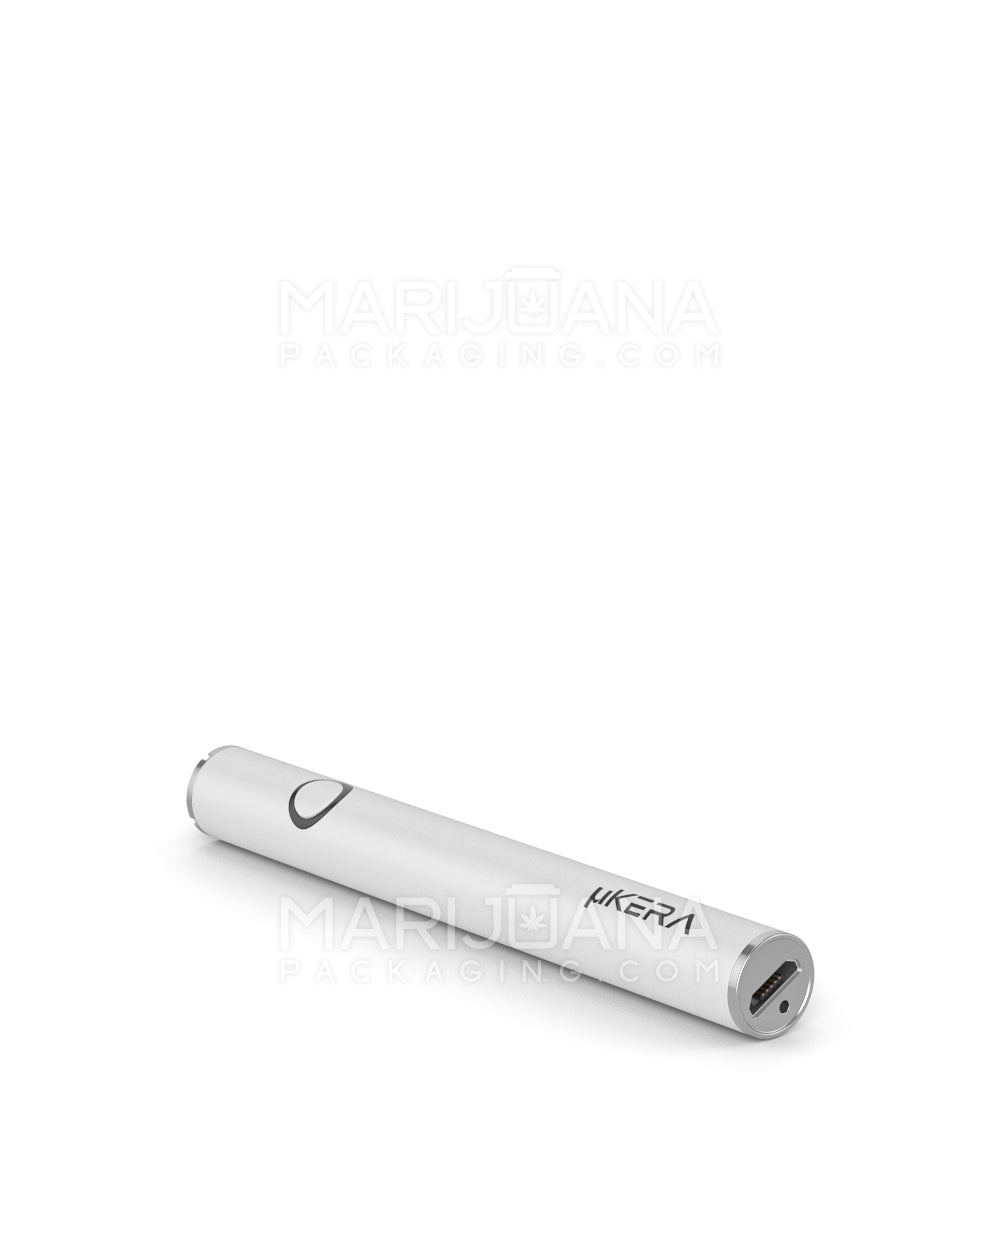 RAE | Variable Voltage Soft Touch Vape Battery | 320mAh - White - 640 Count - 6